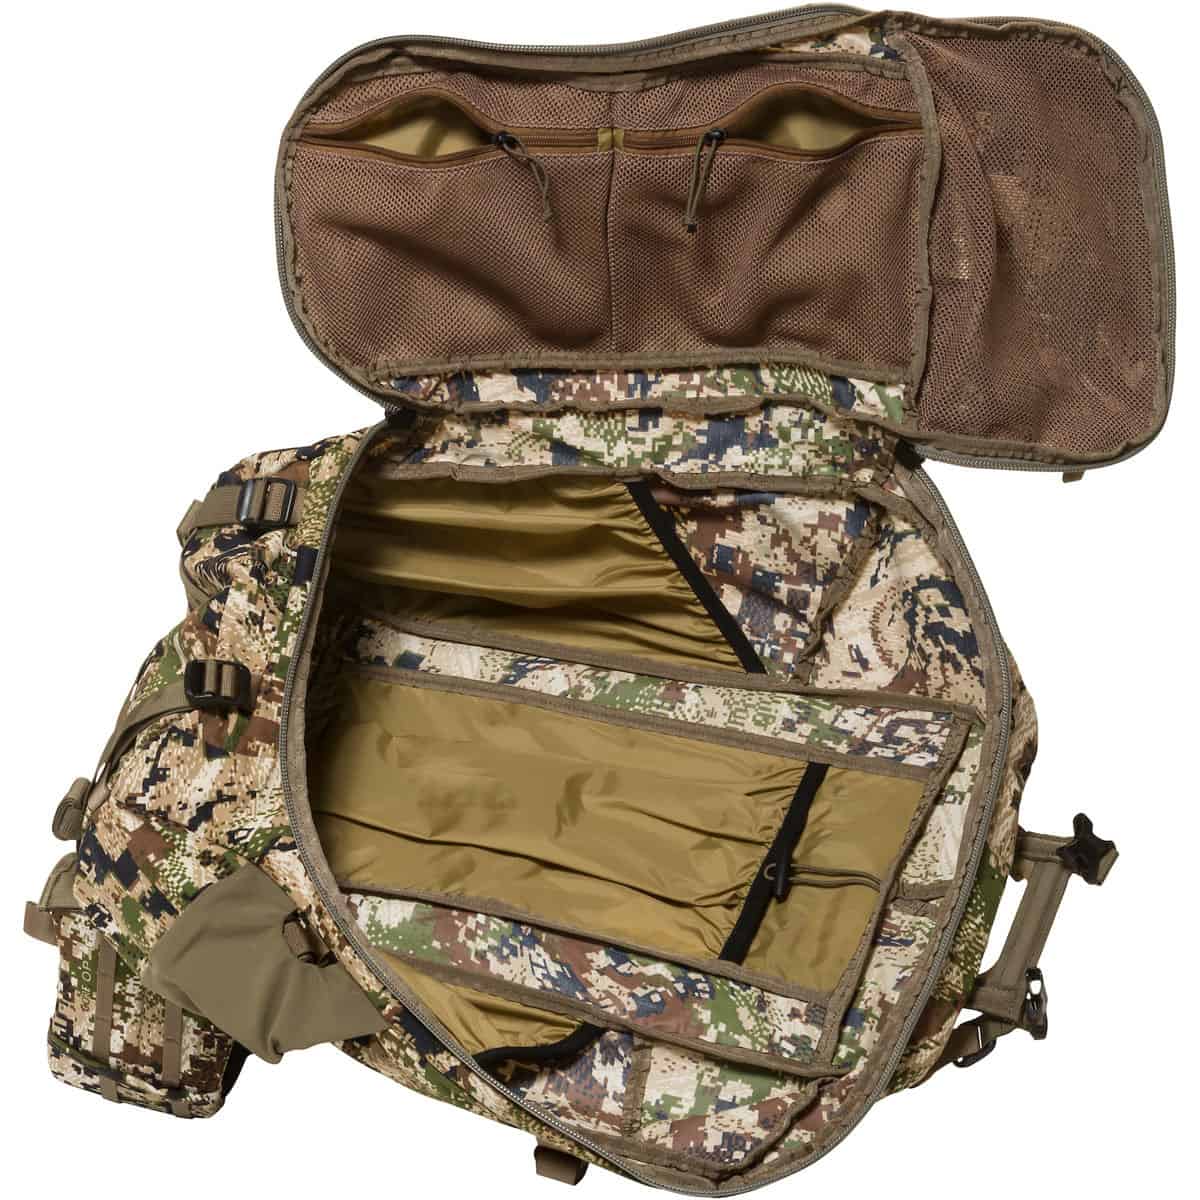 888564186343 110889 Mystery Ranch Sawtooth 45 Small Hunting Backpack optifade subalpine Duffel Style Opening